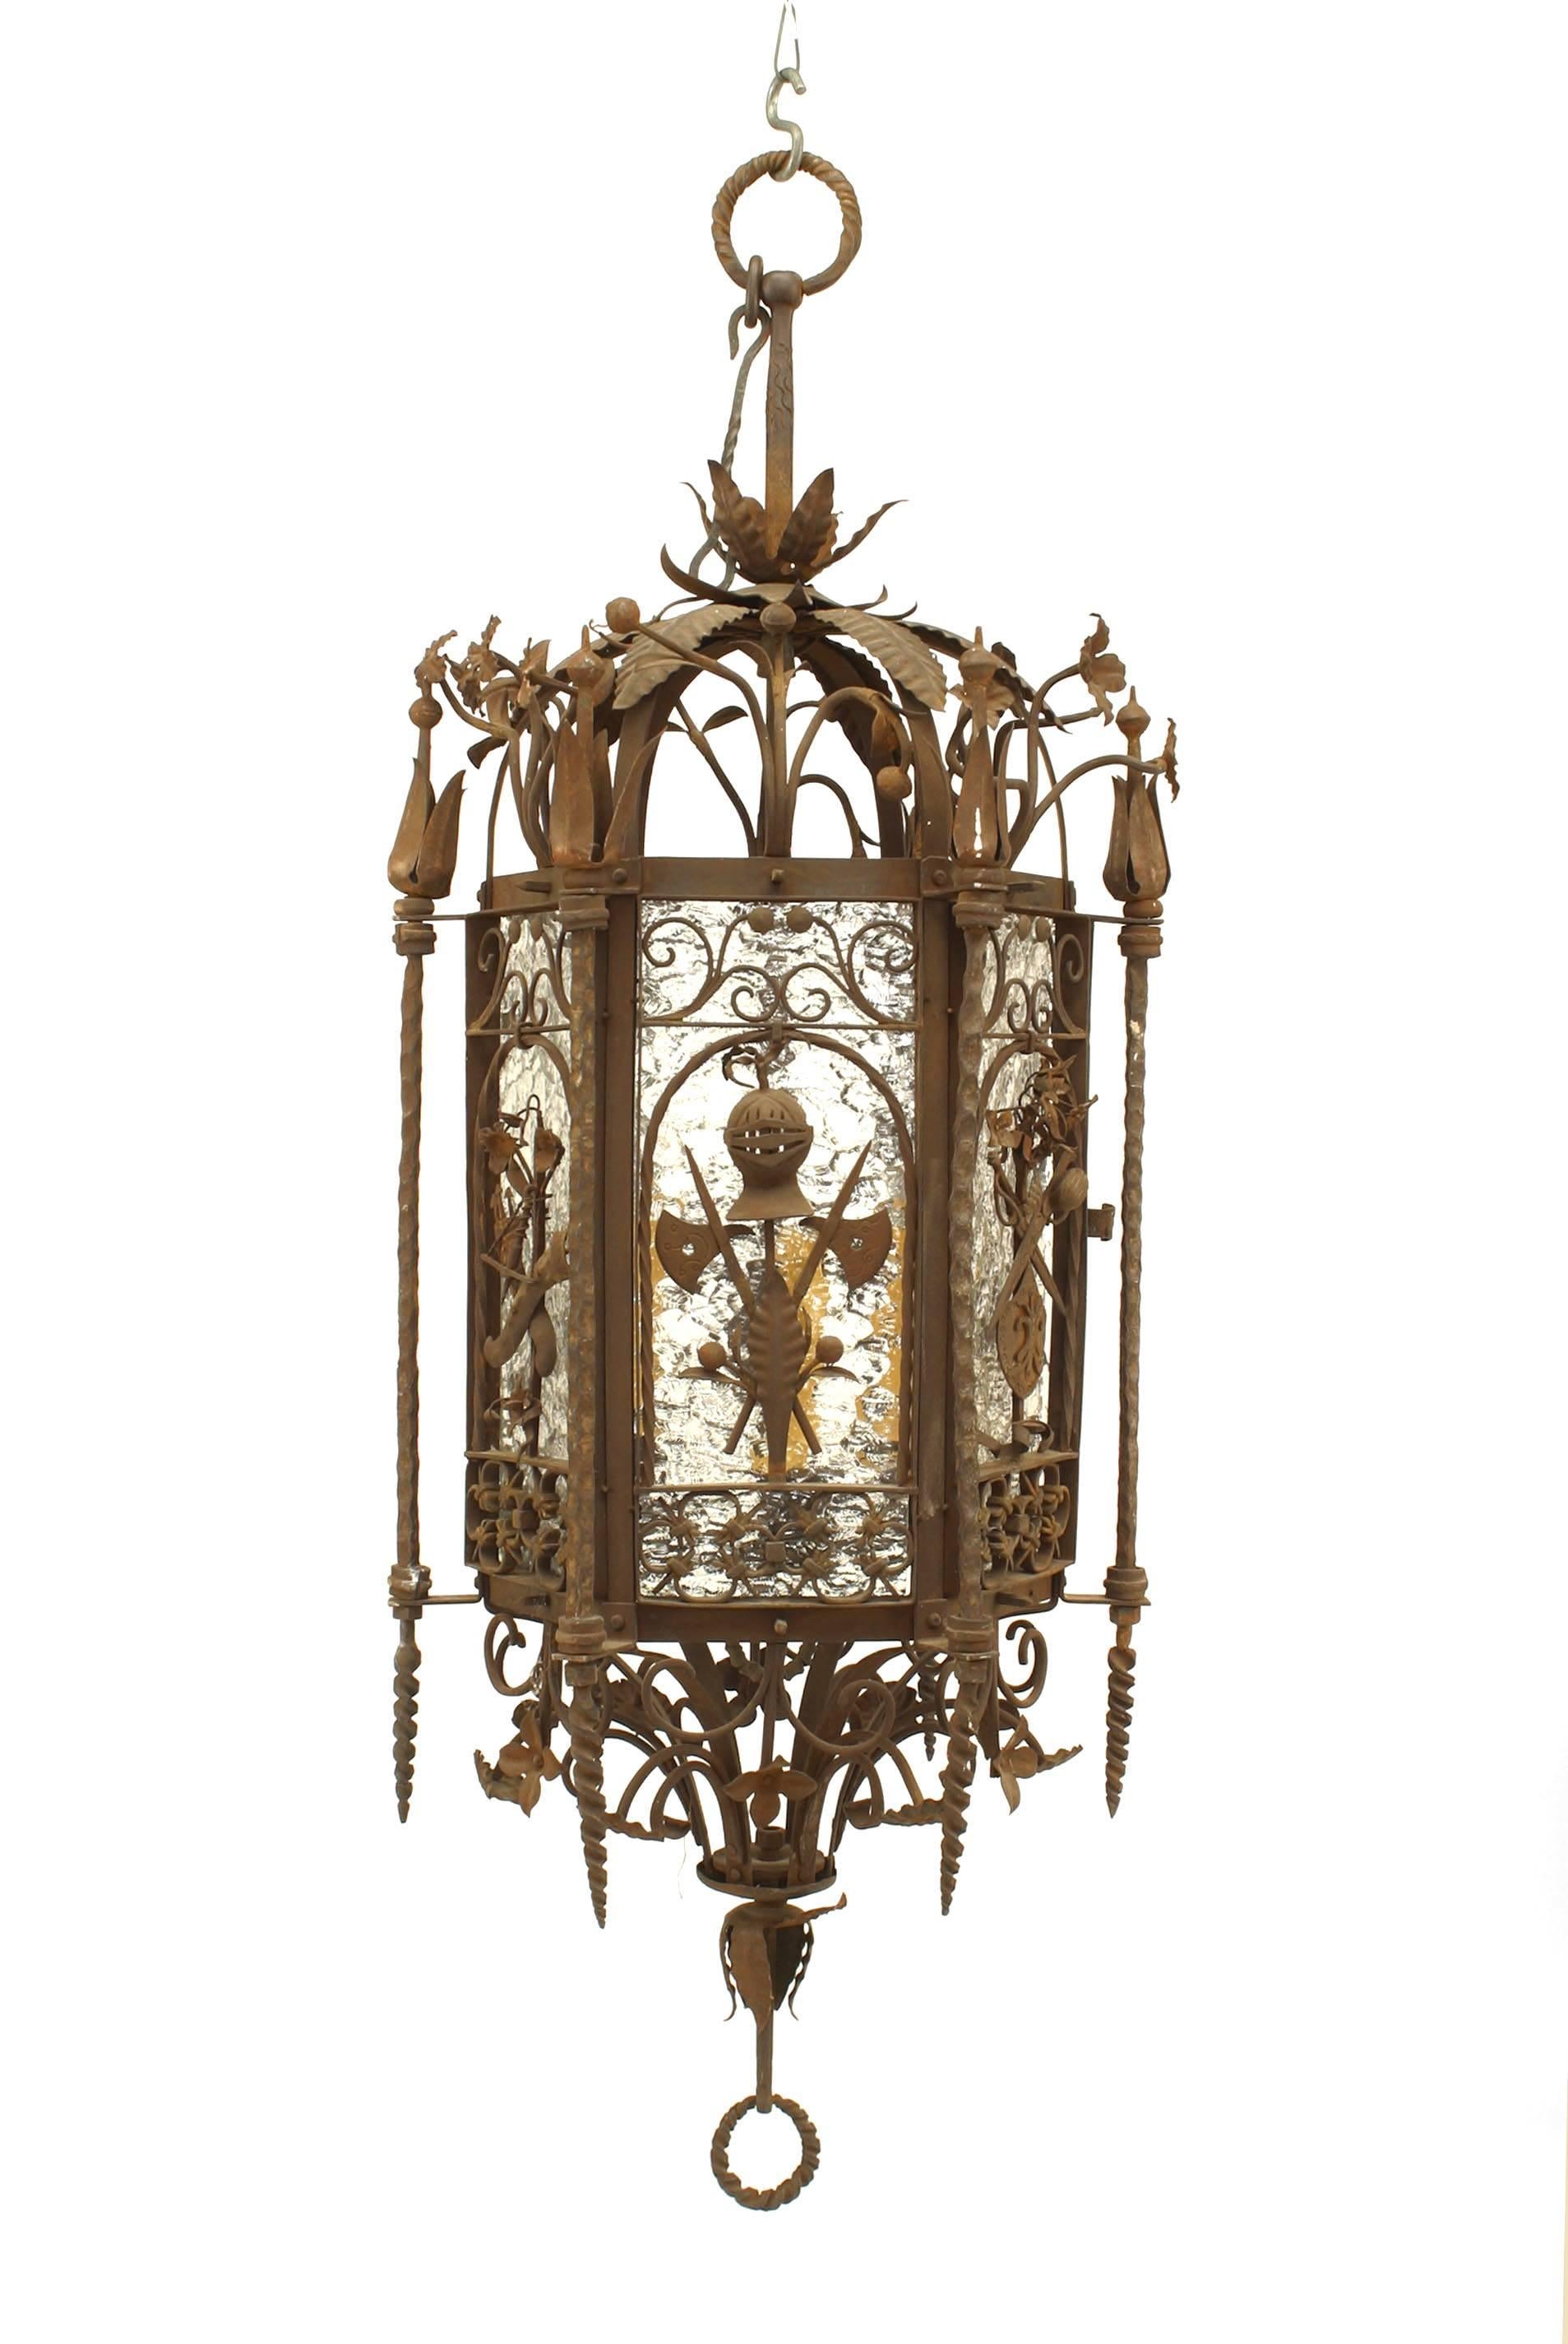 Italian Renaissance-style (19/20th Century) wrought iron 6 sided hanging lantern with military motifs and glass panels (attributed to: SAMUEL YELLIN)
